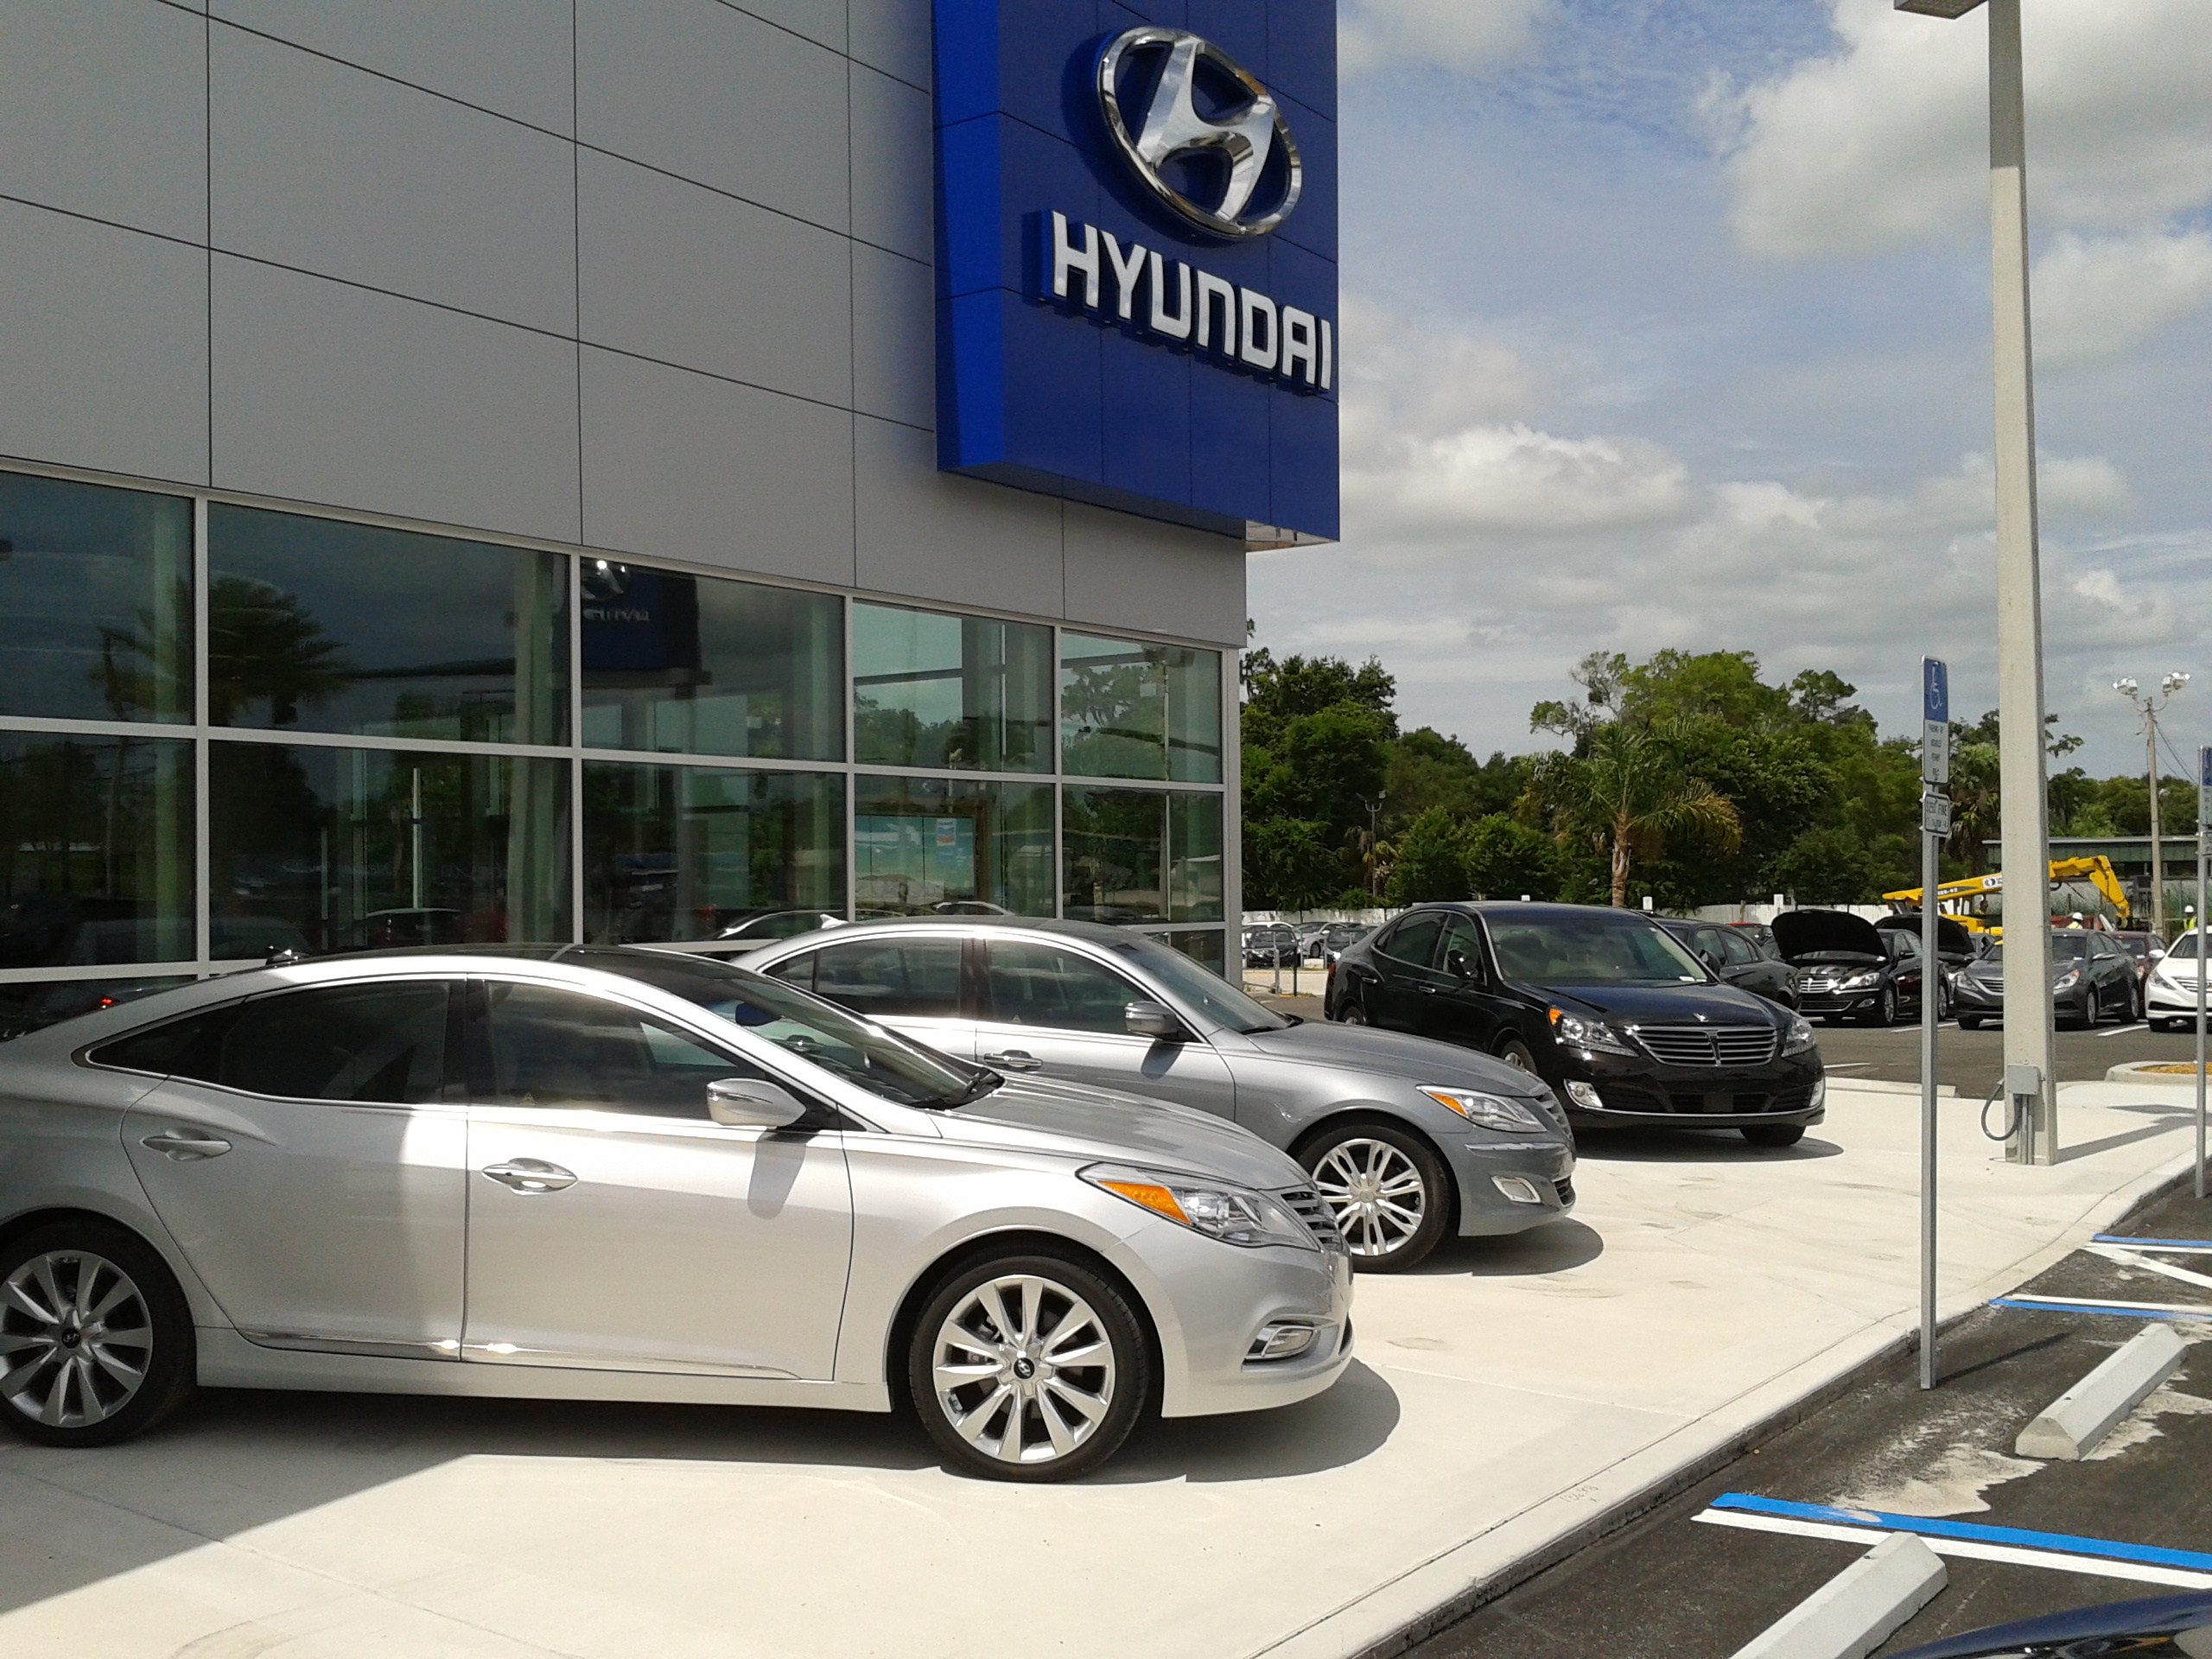 The new Lakeland Hyundai is OPEN! Come see our new state-of-the-art facility and experience what car shopping should be...